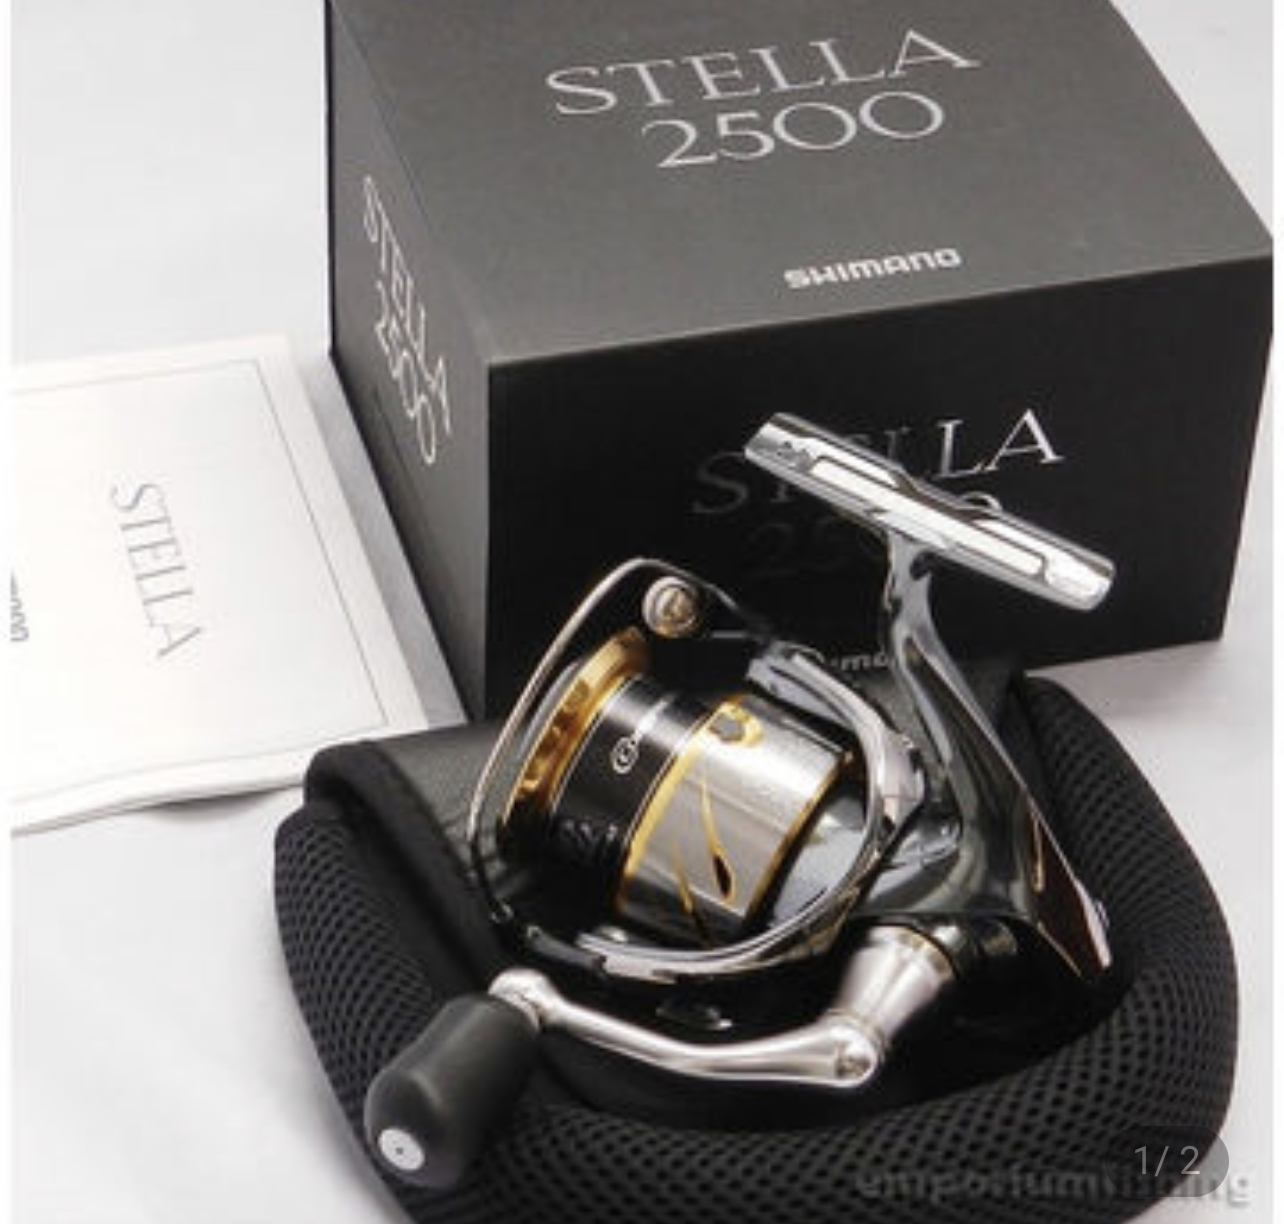 Looking for shimano stella 2014 2500 model.